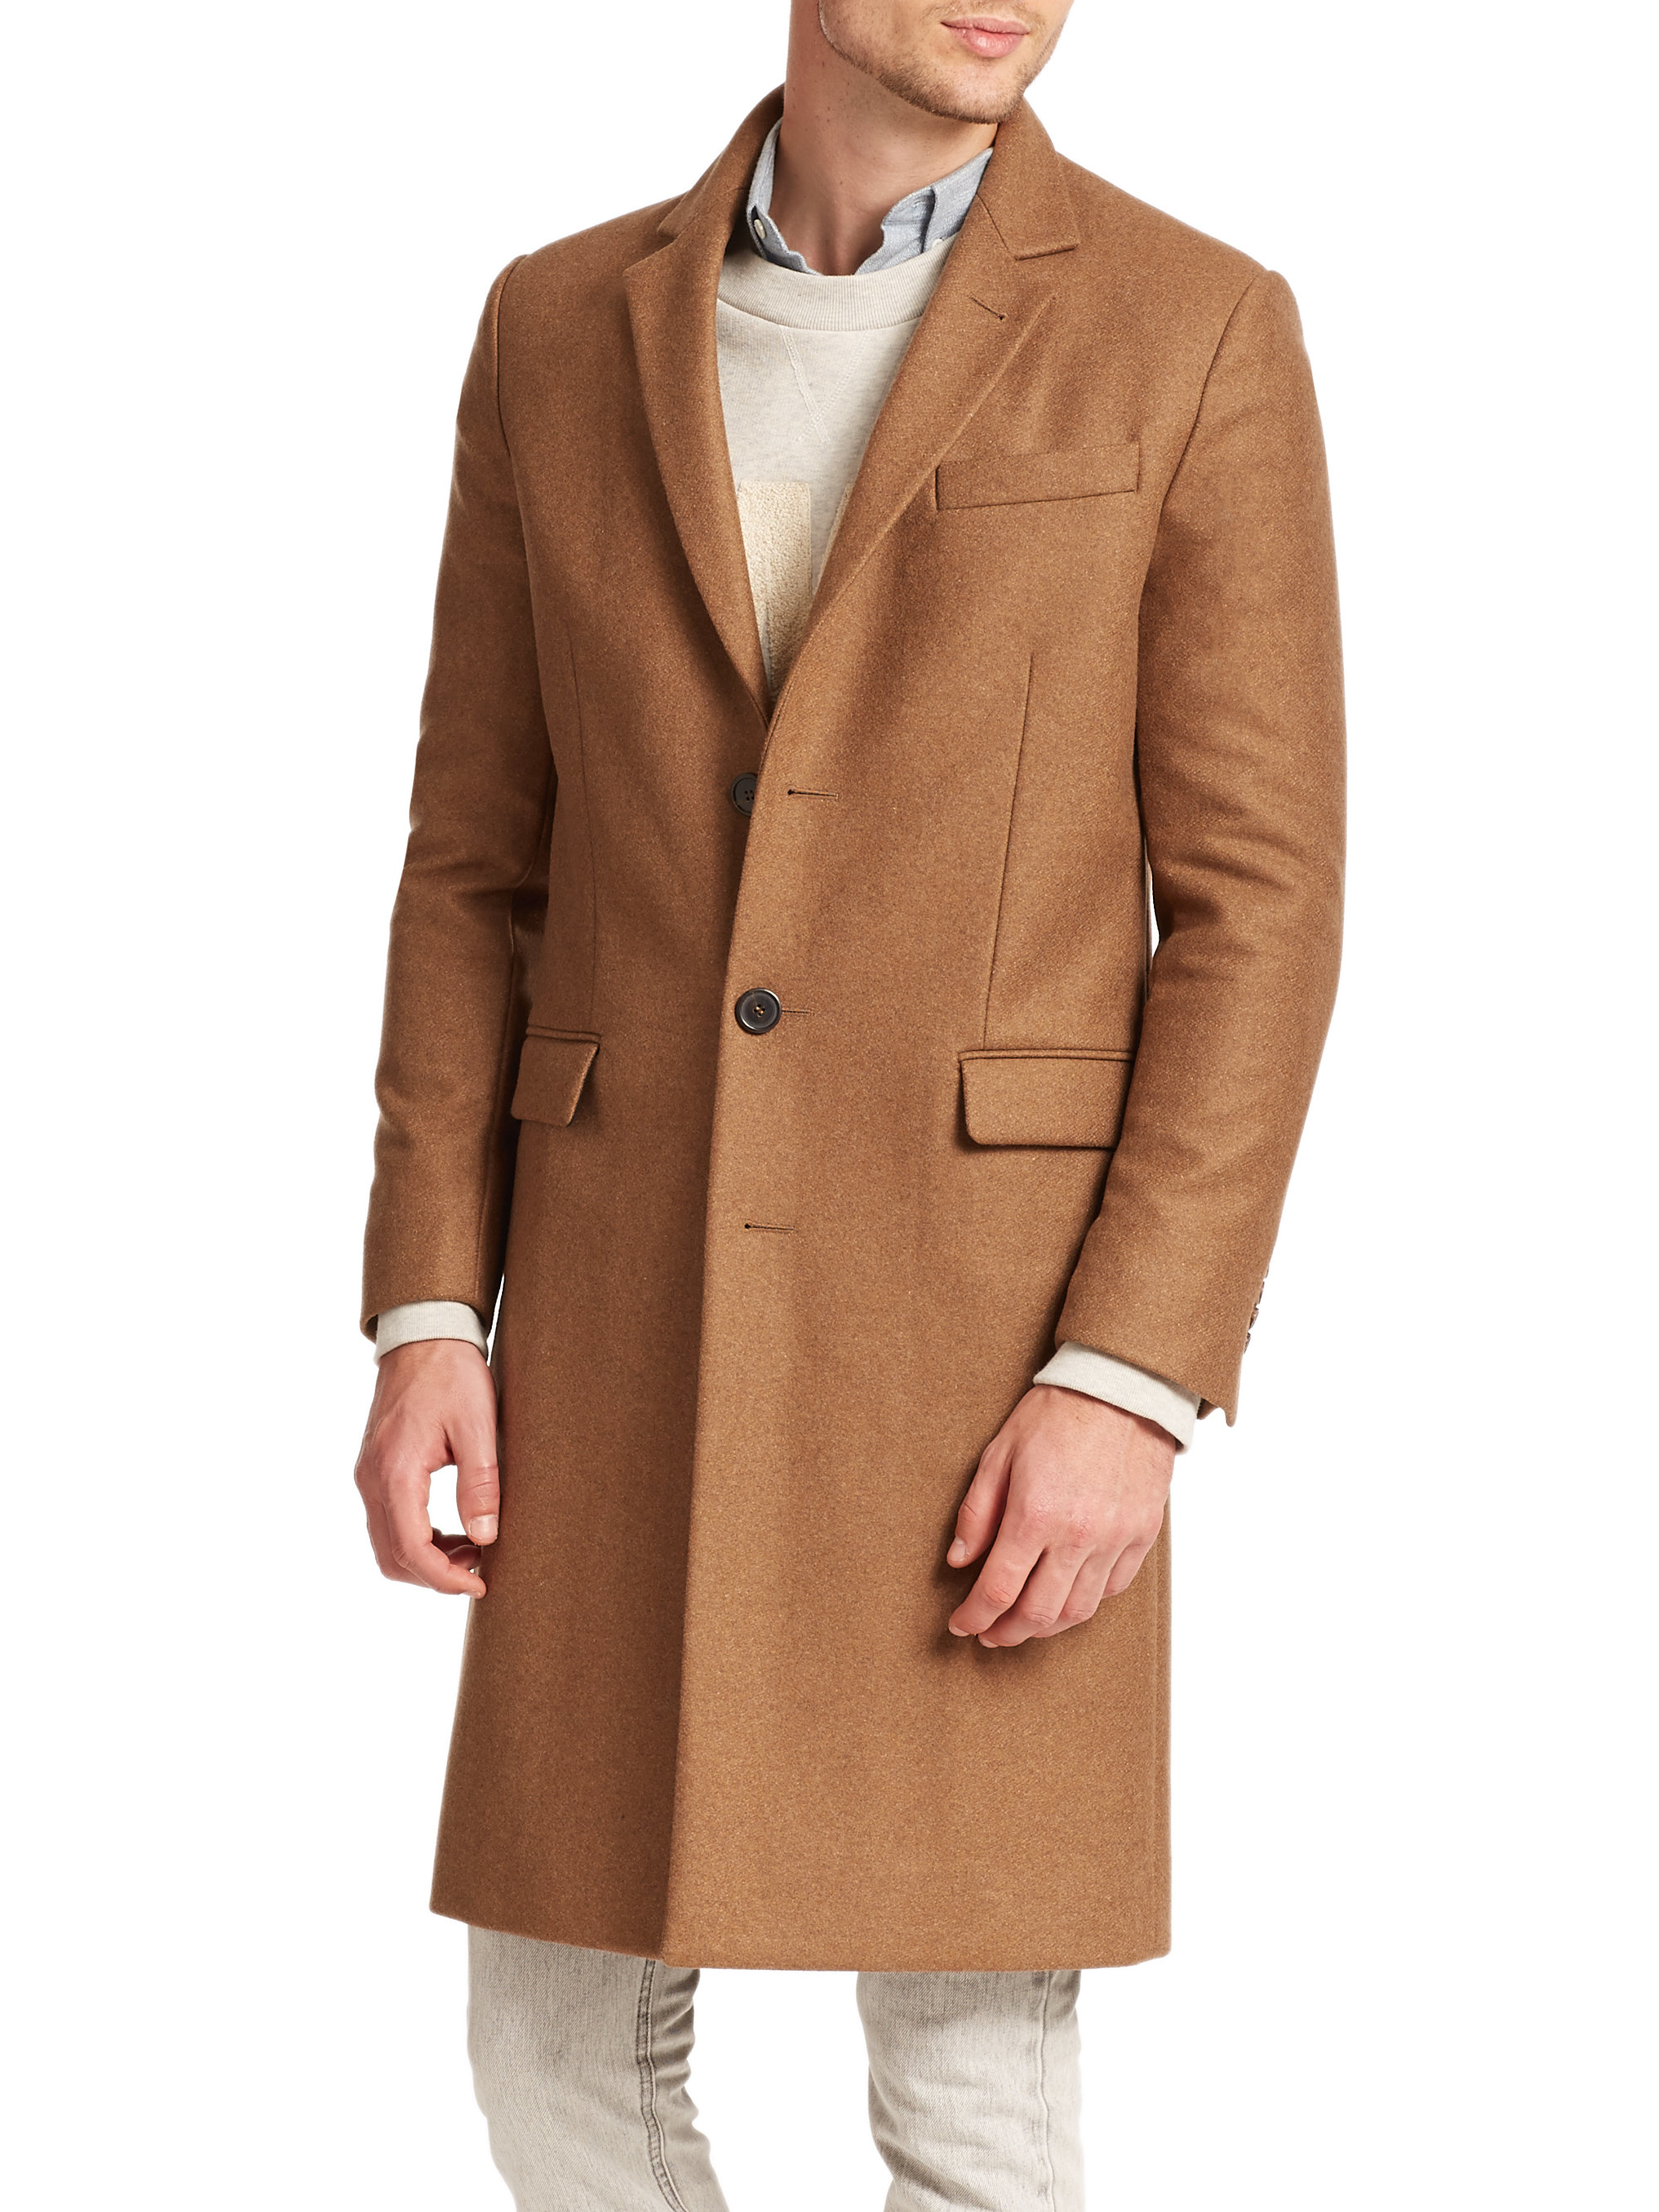 Lyst - Ami Wool-blend Overcoat in Natural for Men